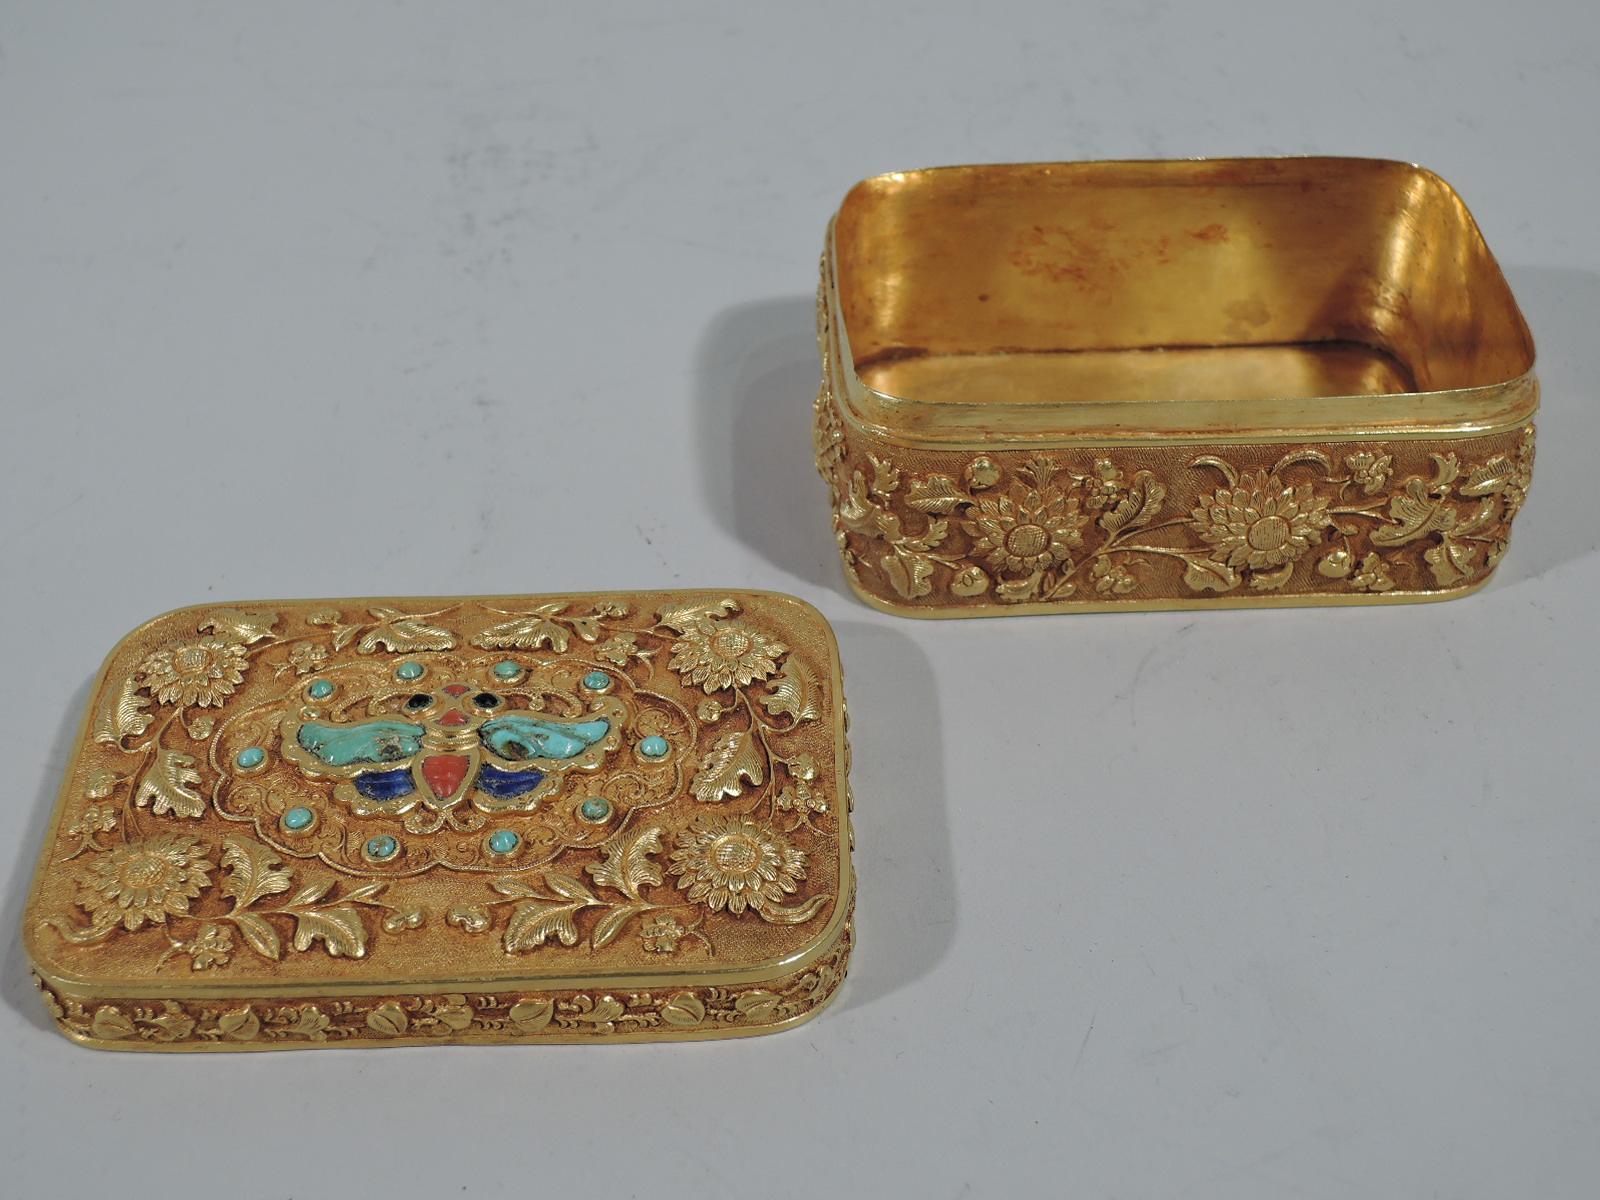 Antique Chinese gold covered box with semi-precious stones. Rectangular with curved corners . Finely chased and repousse ornament on stippled ground. Box and cover top have wraparound floral garland. Cover top has semi-precious stones inset in form